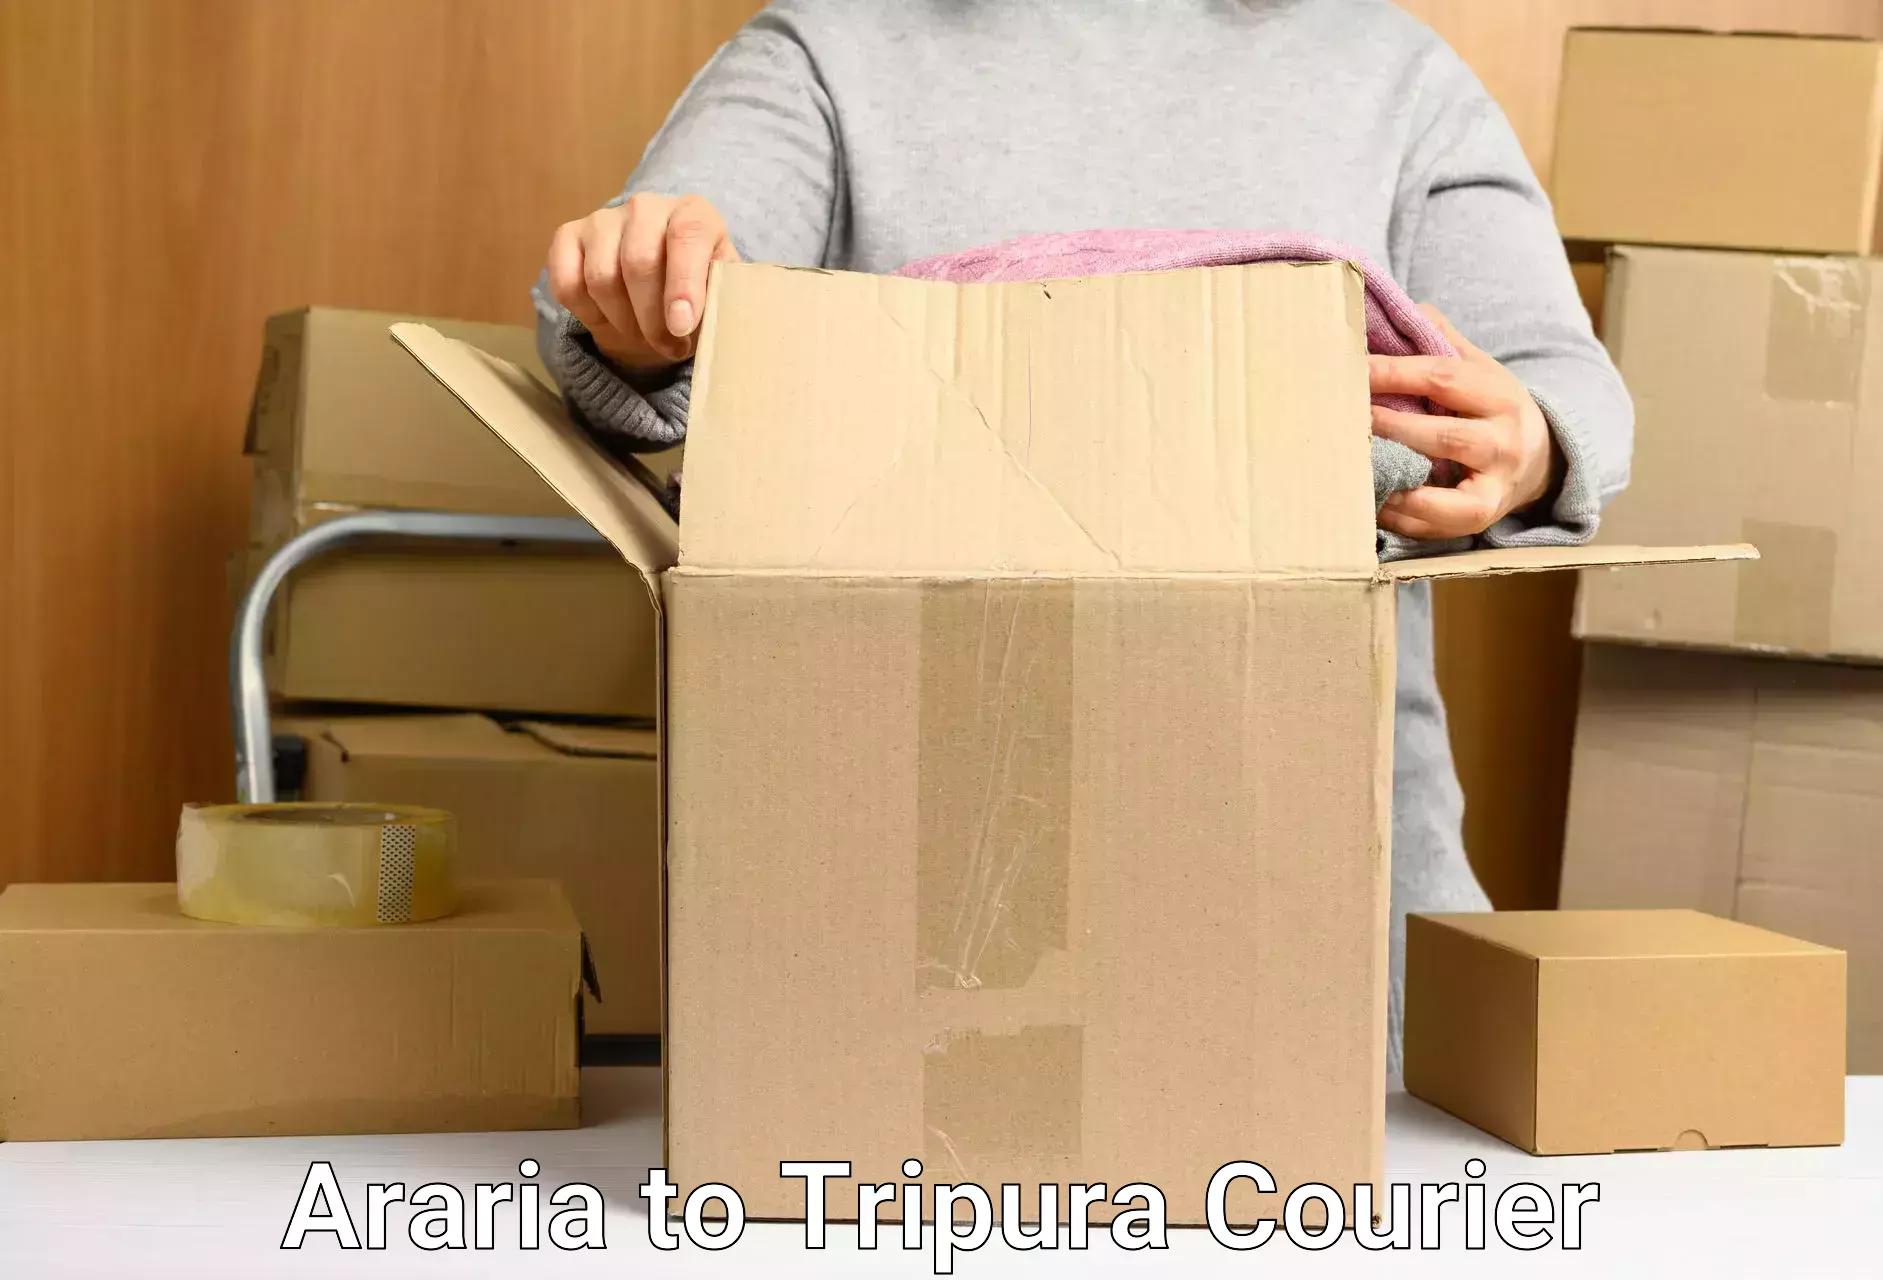 Global shipping solutions Araria to Tripura